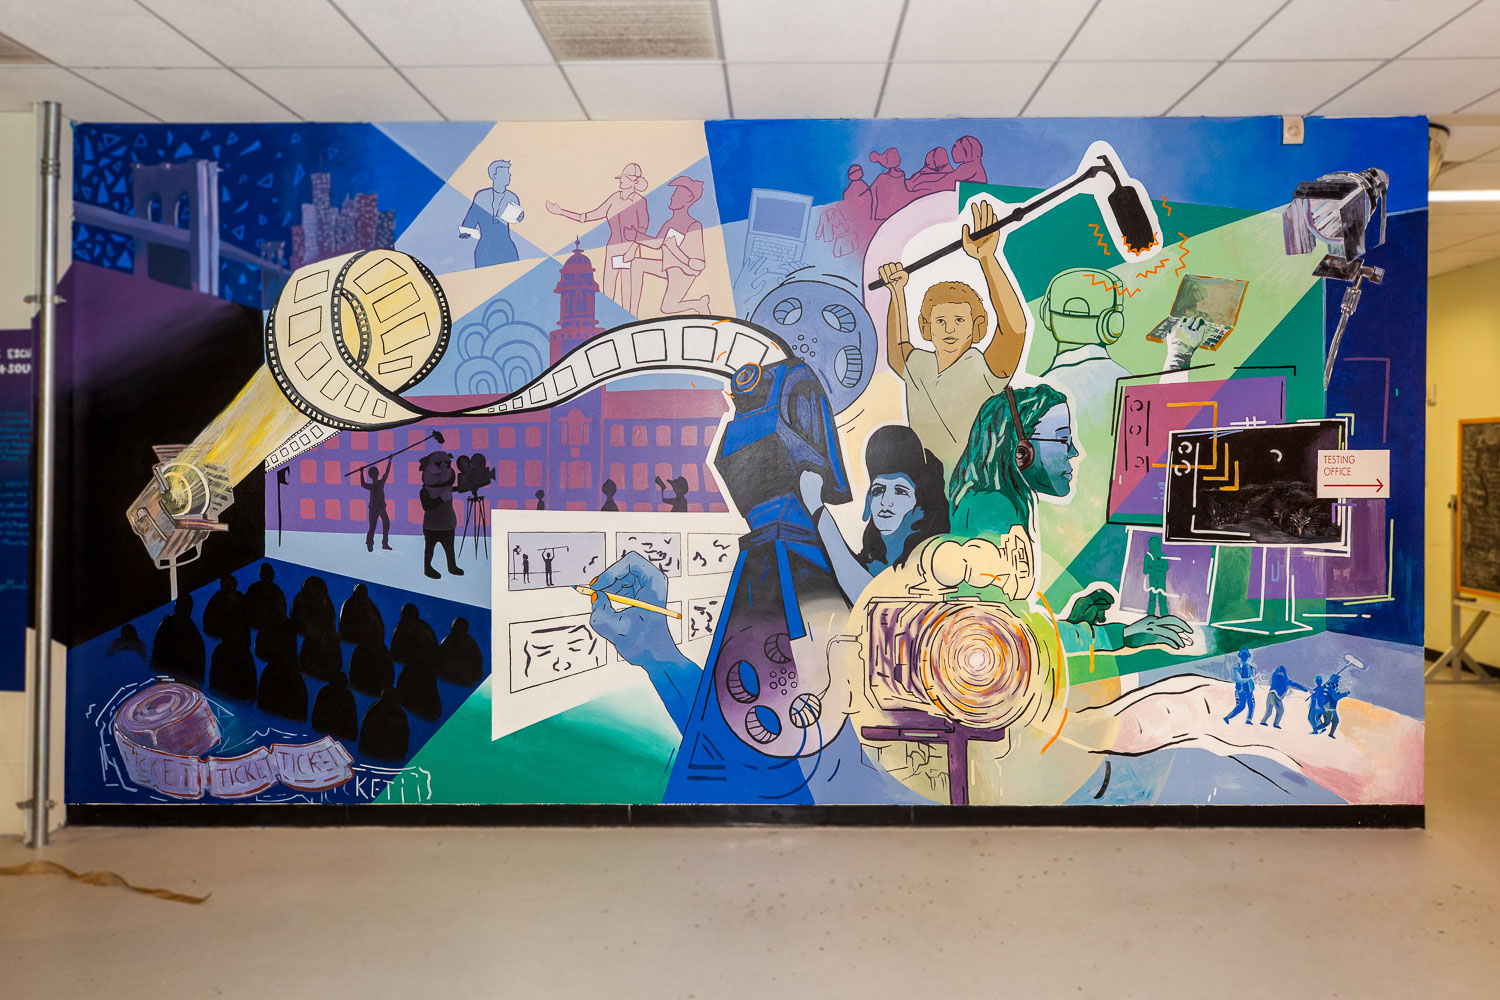 A new mural was unveiled in the Film Department in the West End Building